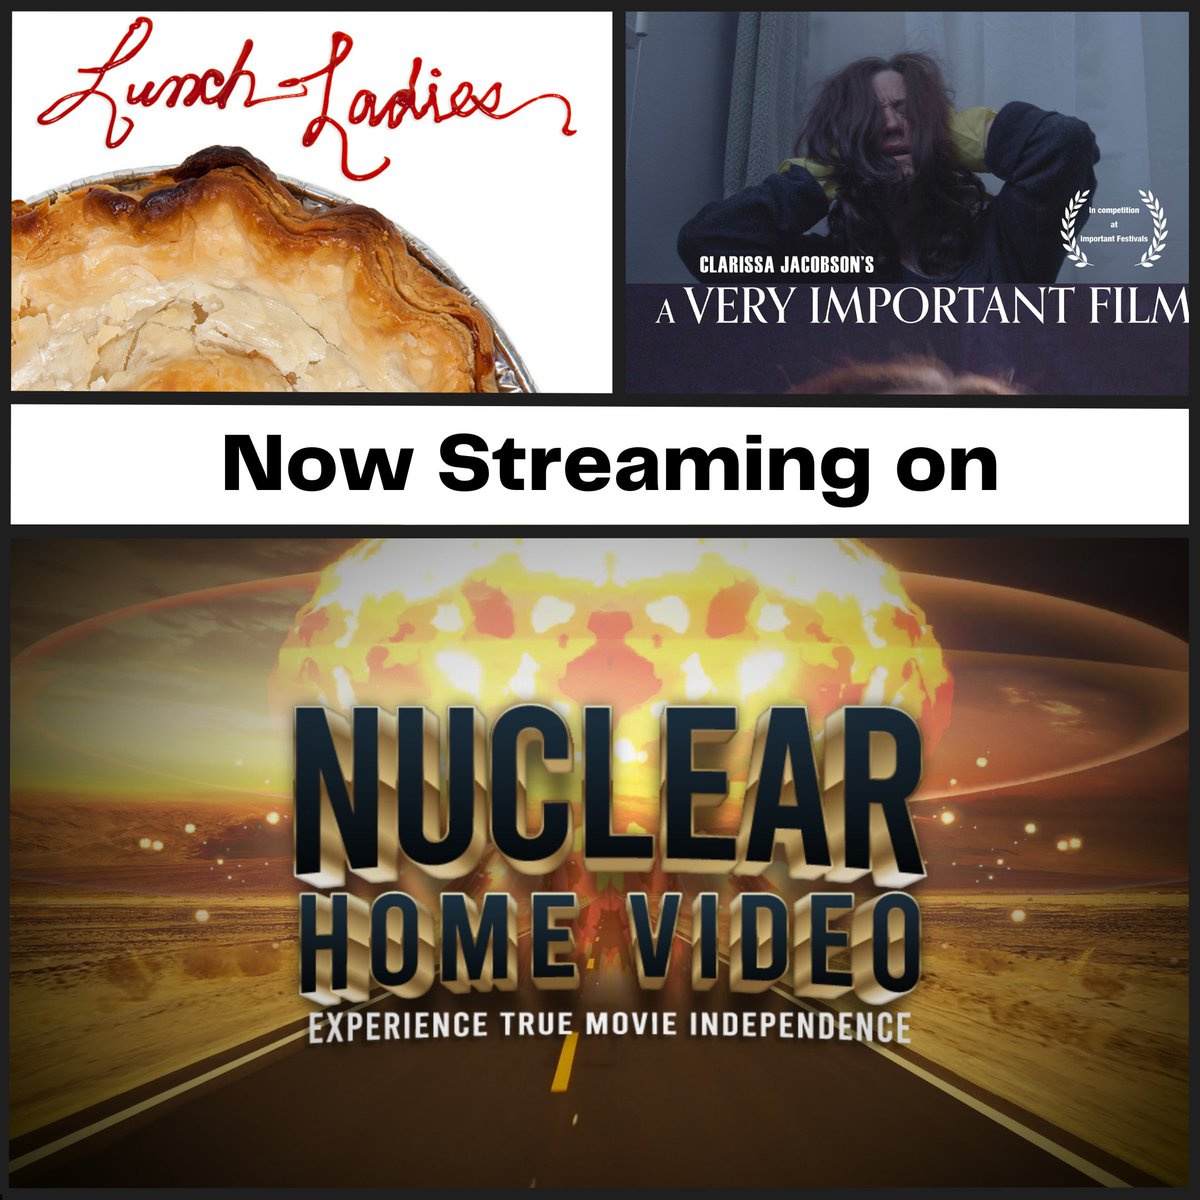 SWEET!  Lunch Ladies is now streaming on @NHomeVideos  along with A Very Important Film!  #NuclearHomeVideo #VIF #LunchLadiesMovie #LunchLadies portal.nuclearhomevideo.com/single-movie-o…